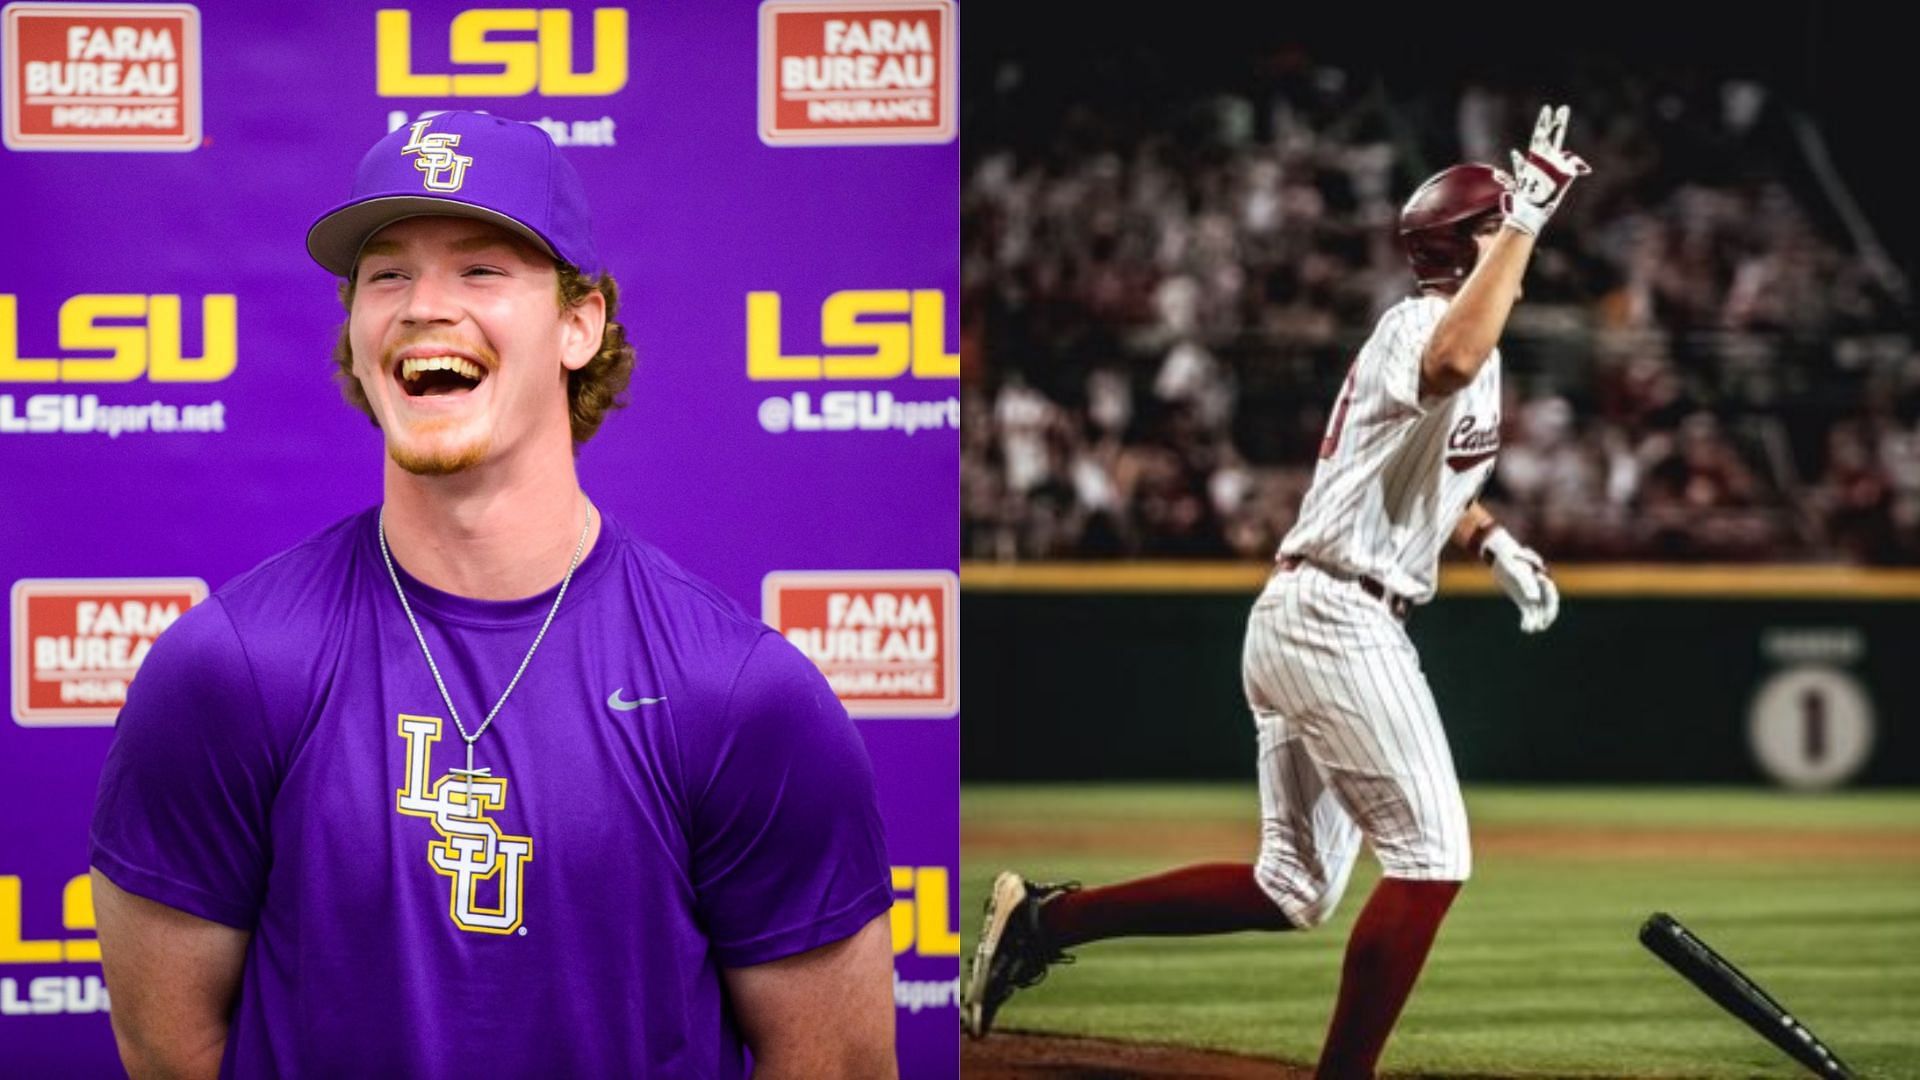 What time does LSU play South Carolina today?